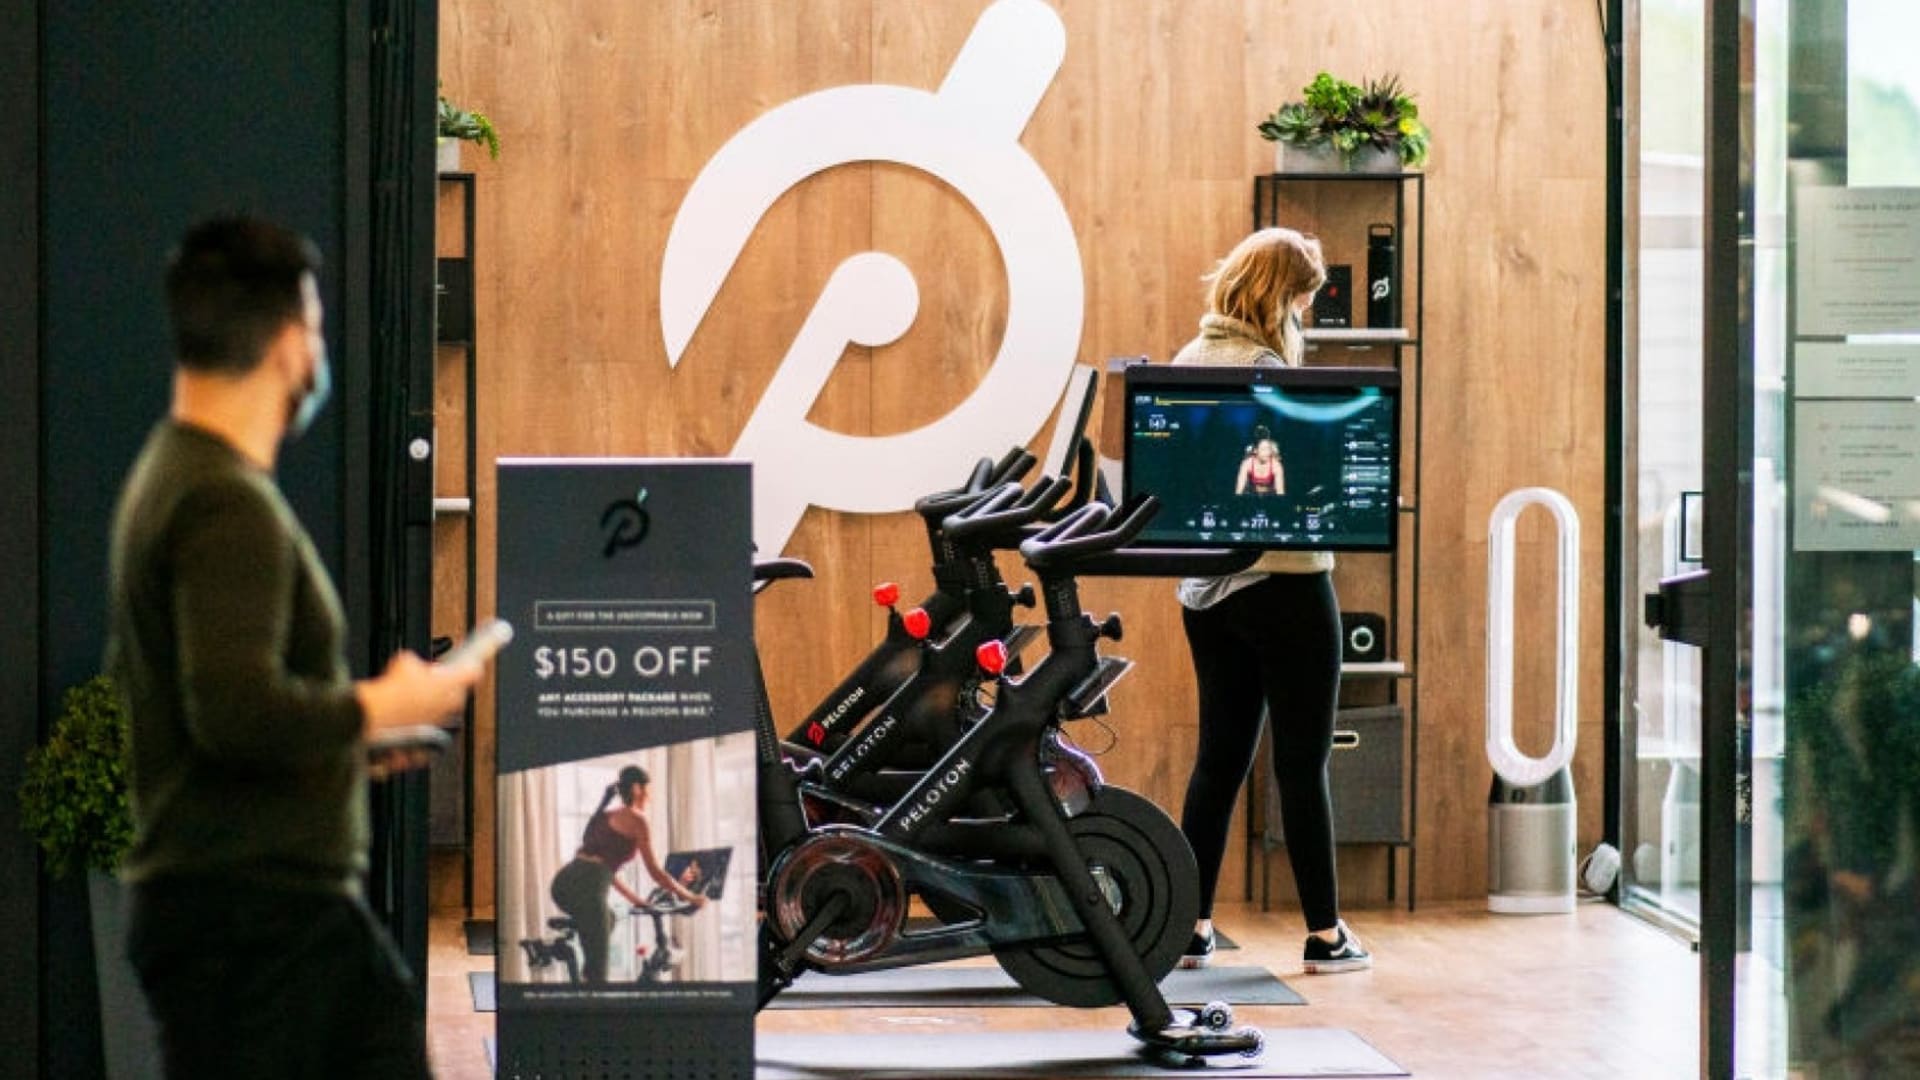 Peloton's CEO Quit After Laying Off 2,800 People. It's a Brutal Lesson About How Not to Lead